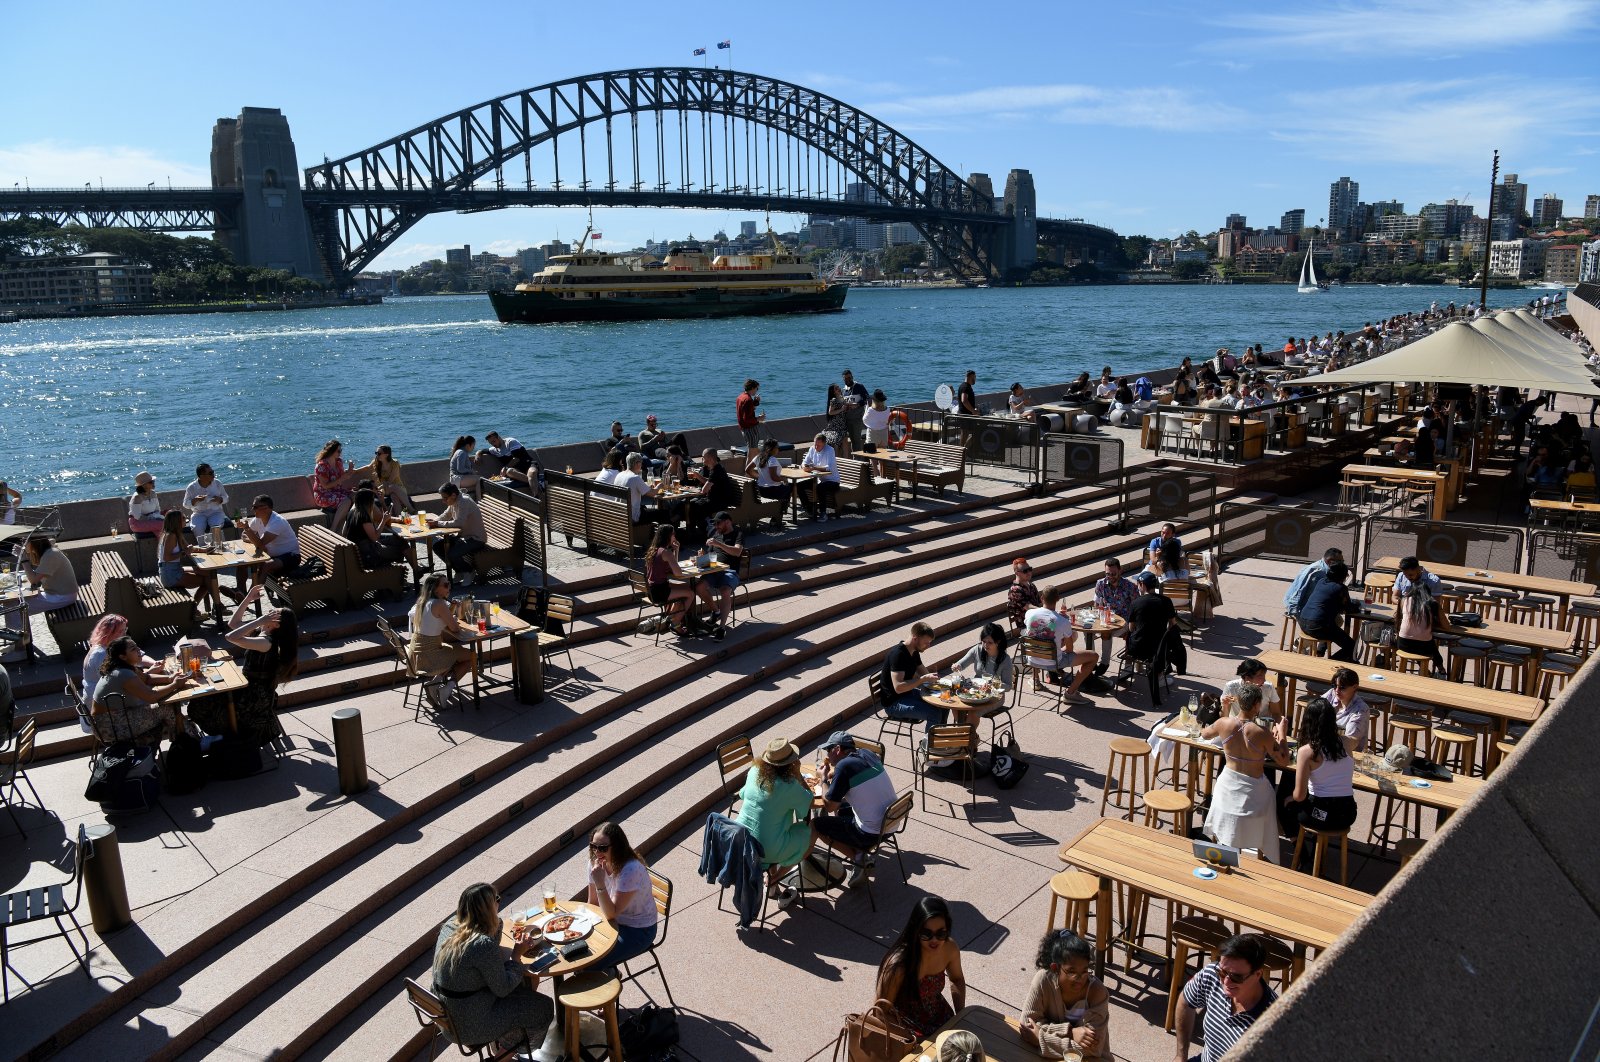  Members of the public are seen at outdoor dining areas at The Sydney Opera House, in Sydney, Australia, Oct.17, 2021. (EPA Photo) 